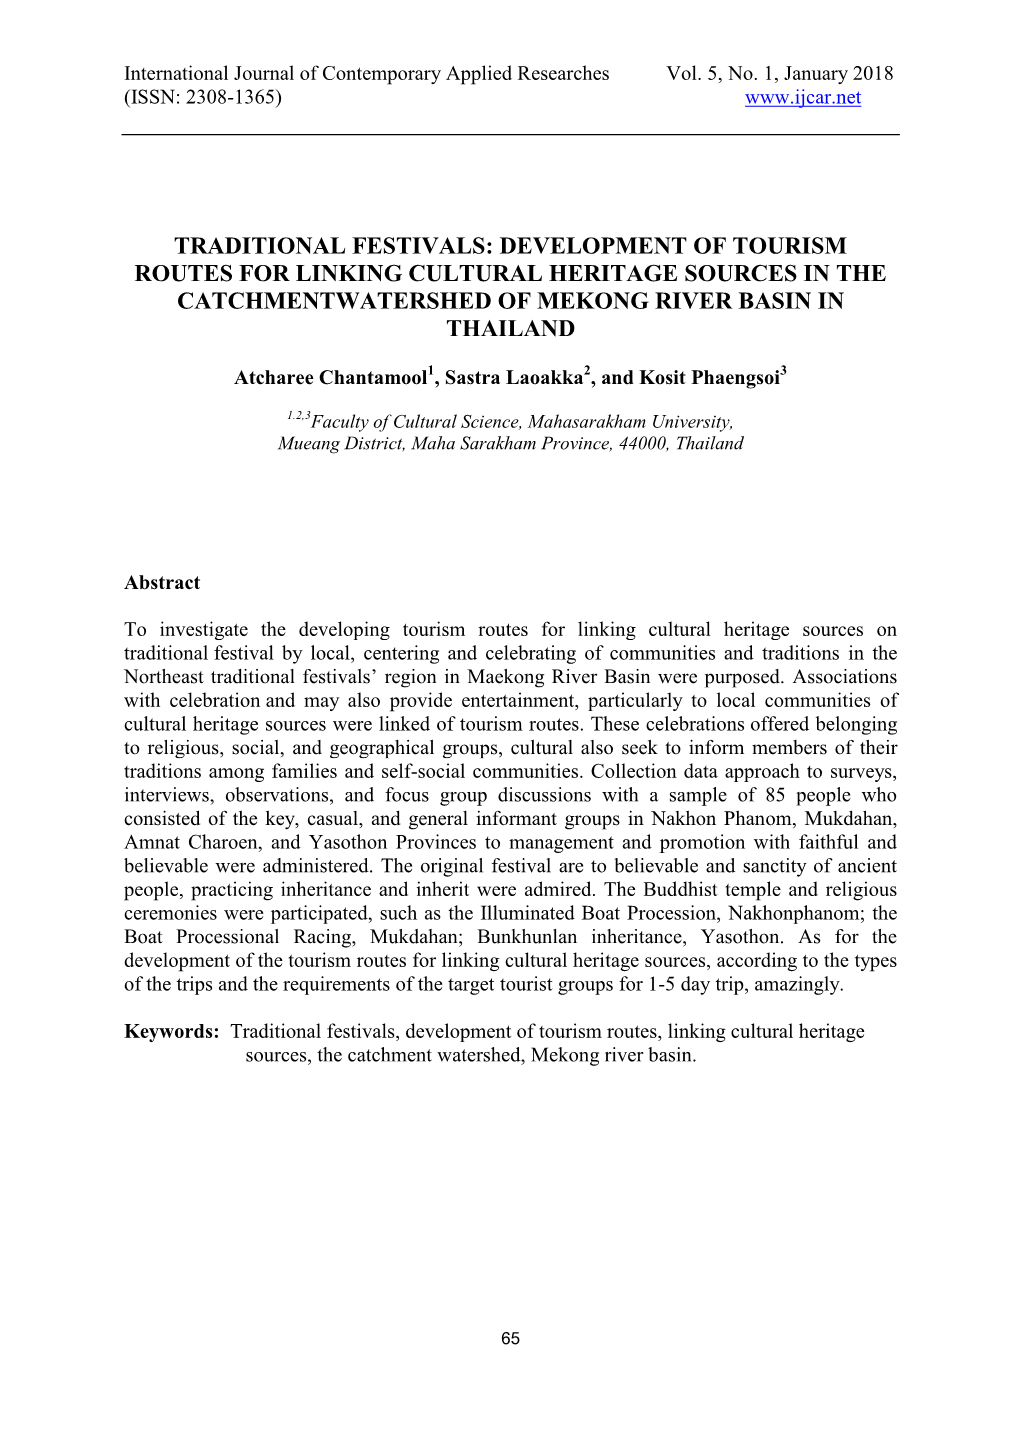 Traditional Festivals: Development of Tourism Routes for Linking Cultural Heritage Sources in the Catchmentwatershed of Mekong River Basin in Thailand